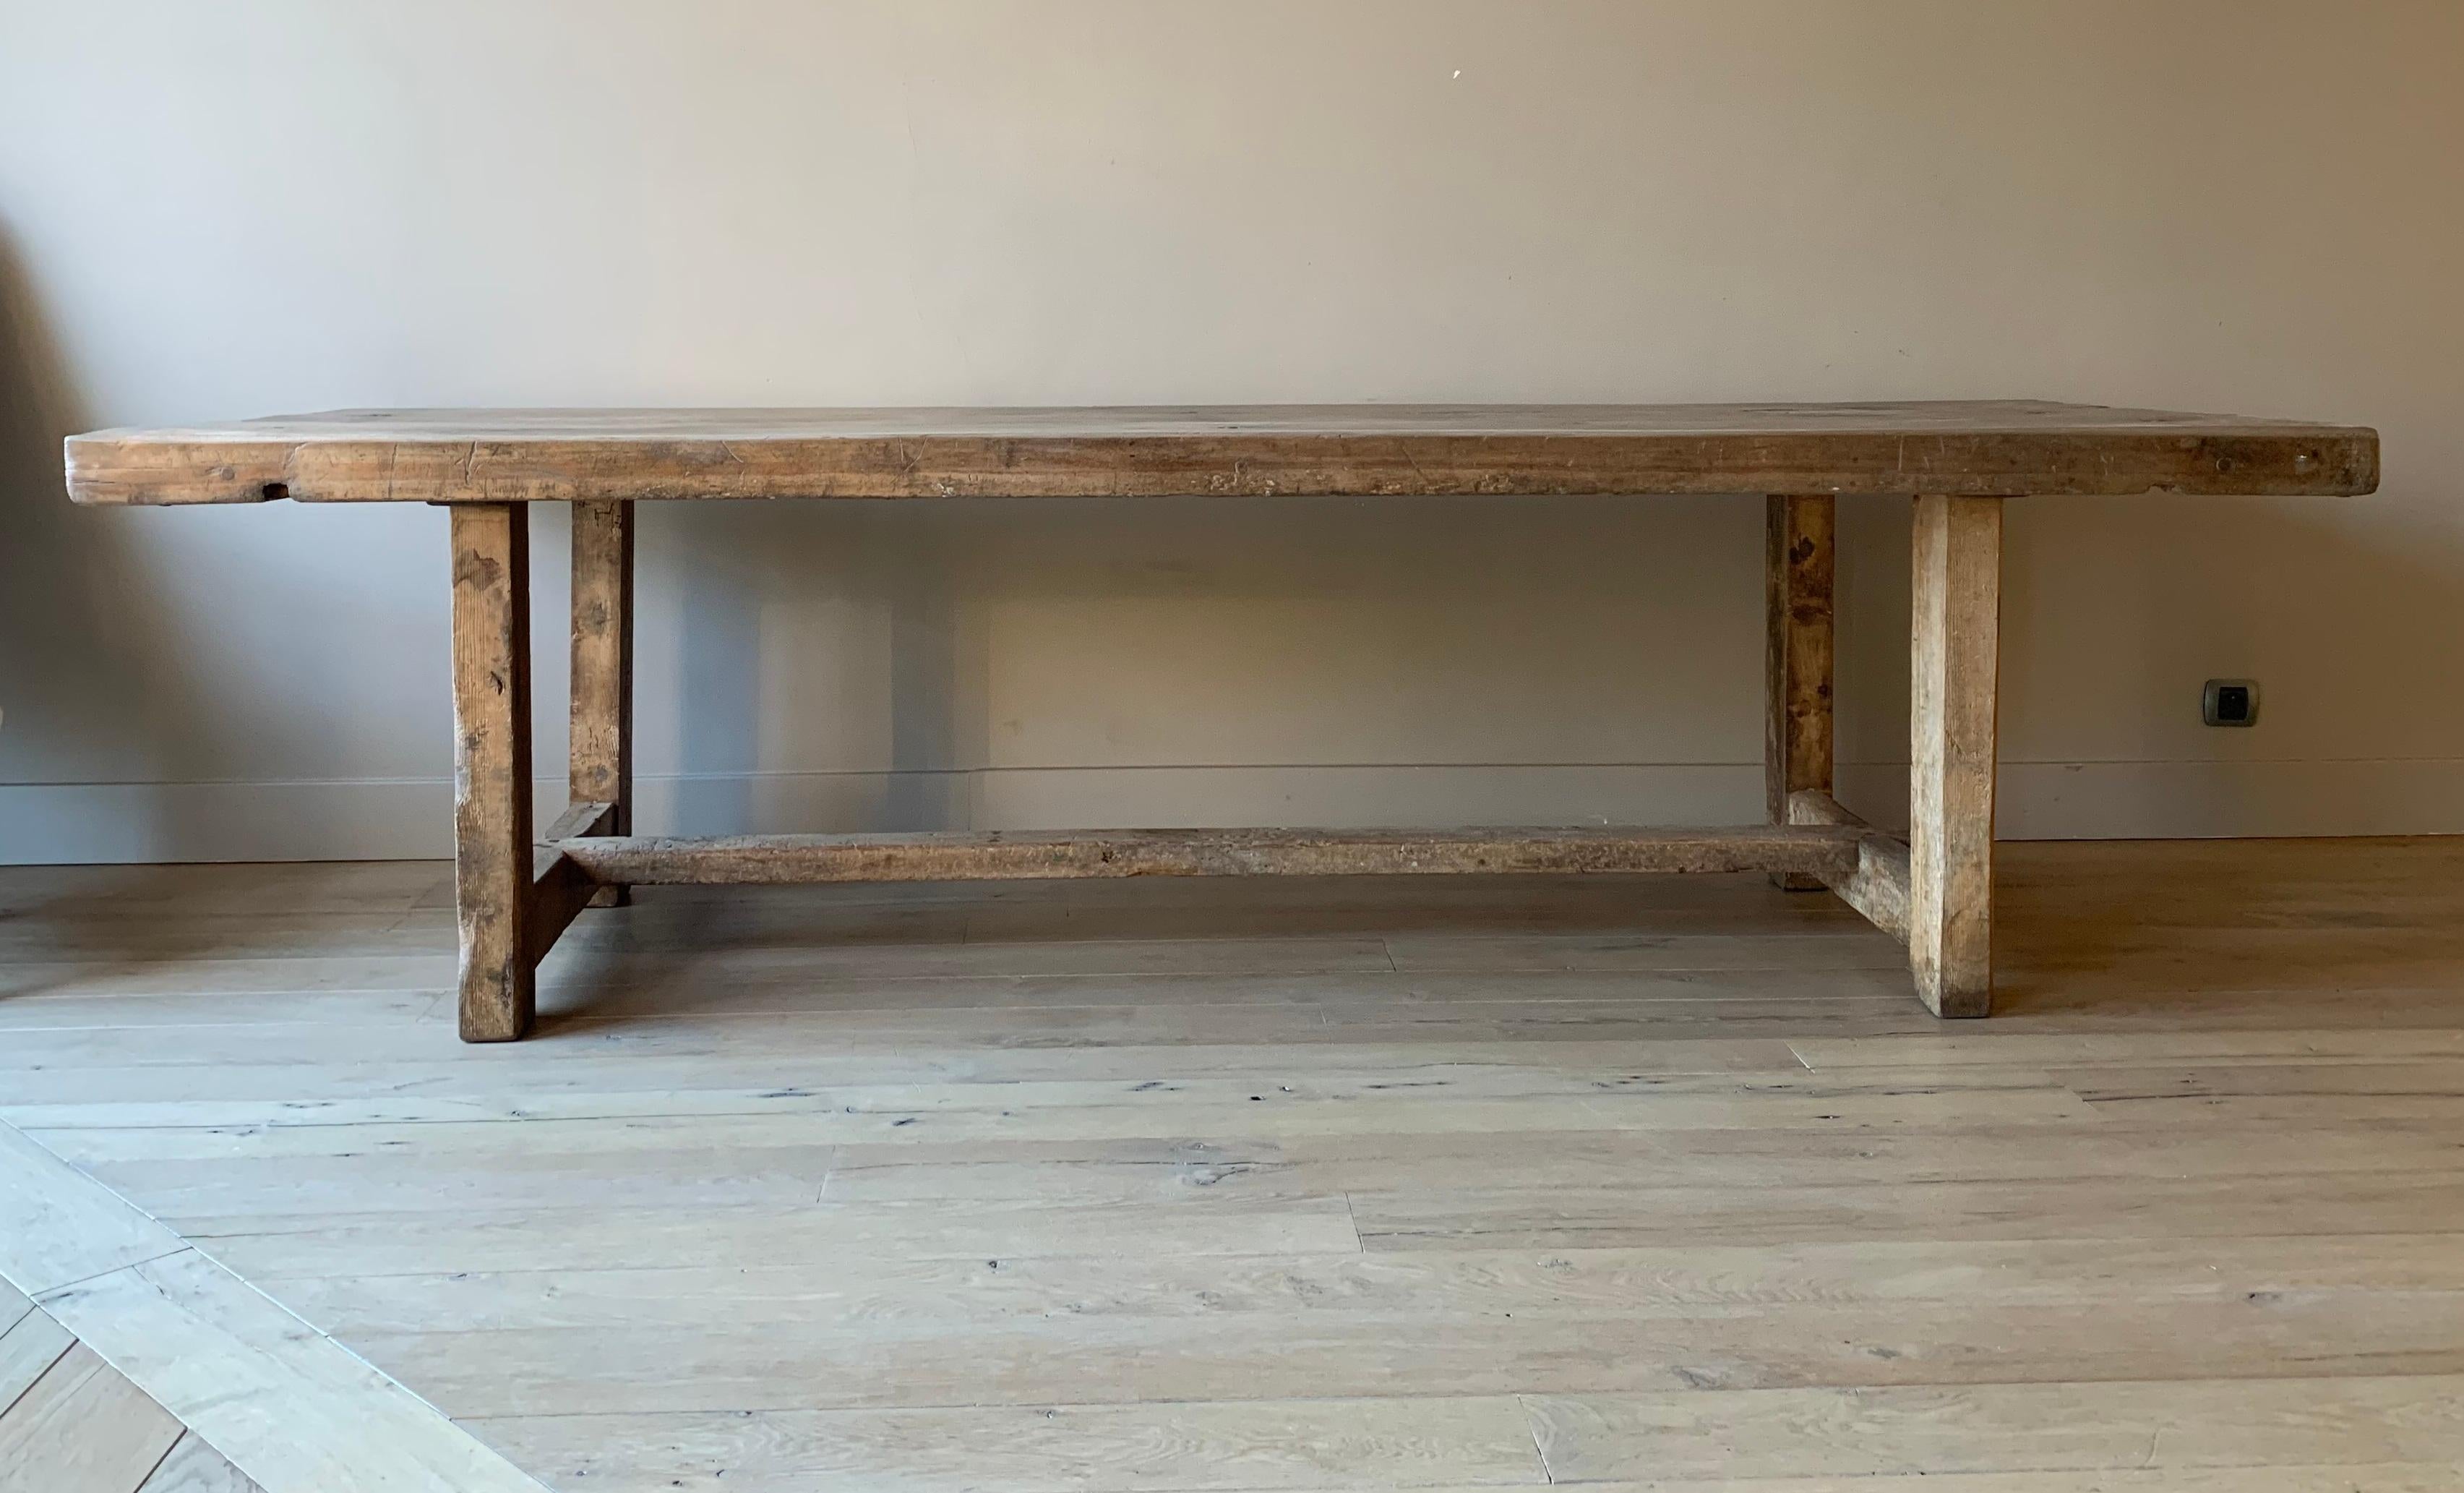 A great 19th century refectory table. This Sycamore table started out as the worktable of 19th century Scottish baker. In the course of history it was reduced in height and adapted to be a dining table. We made the structure rigid again and